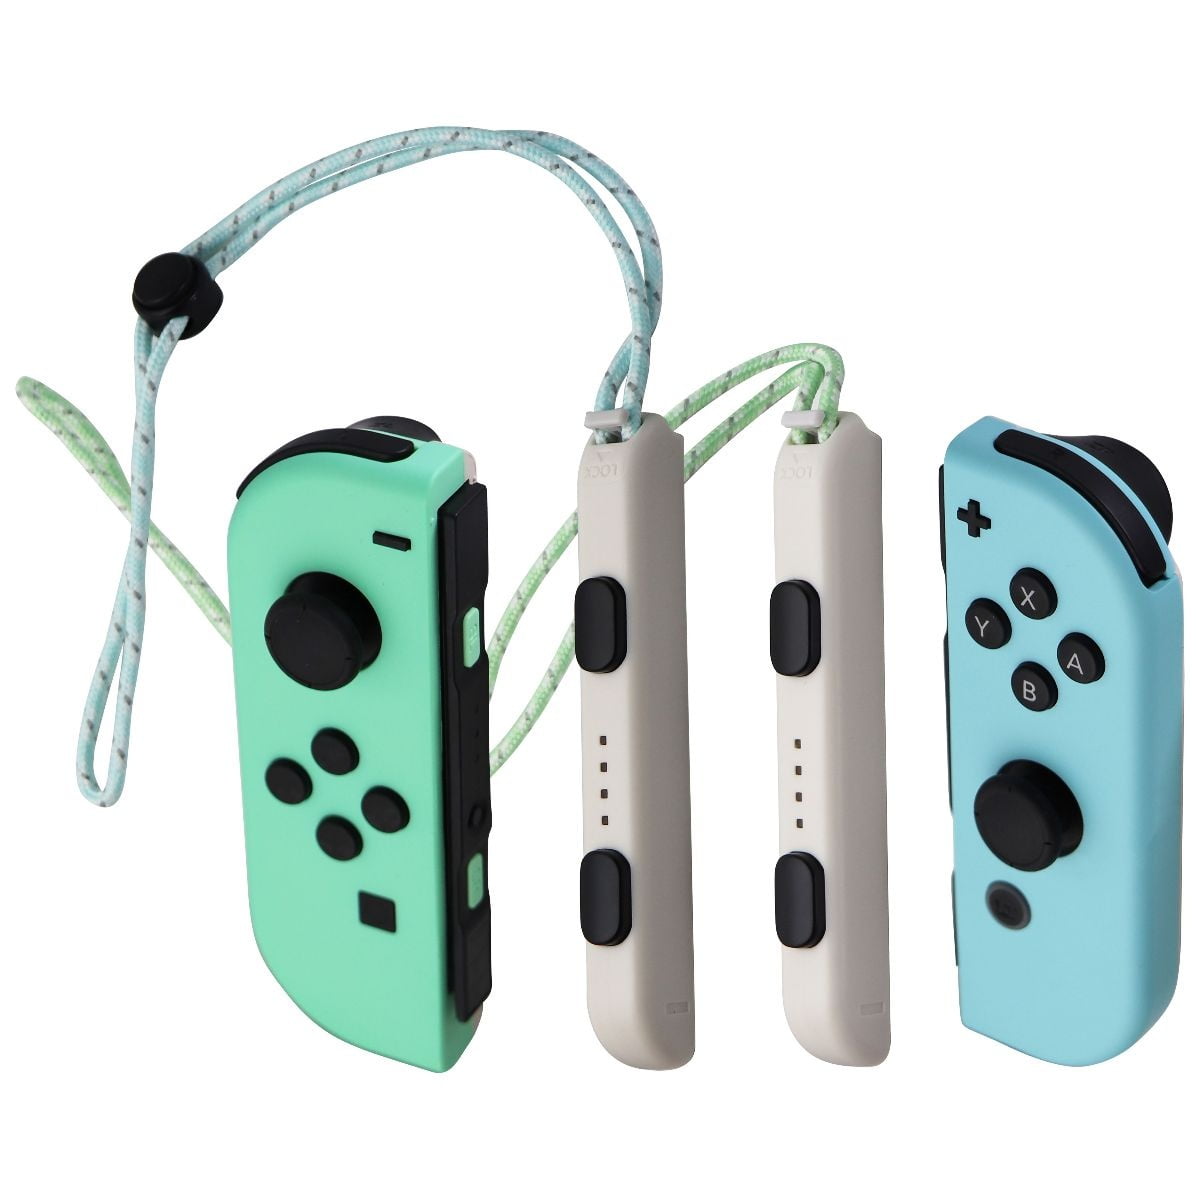 Animal Crossing Left & Right Joy-Cons with Straps - Blue/Green (Used) - Walmart.com